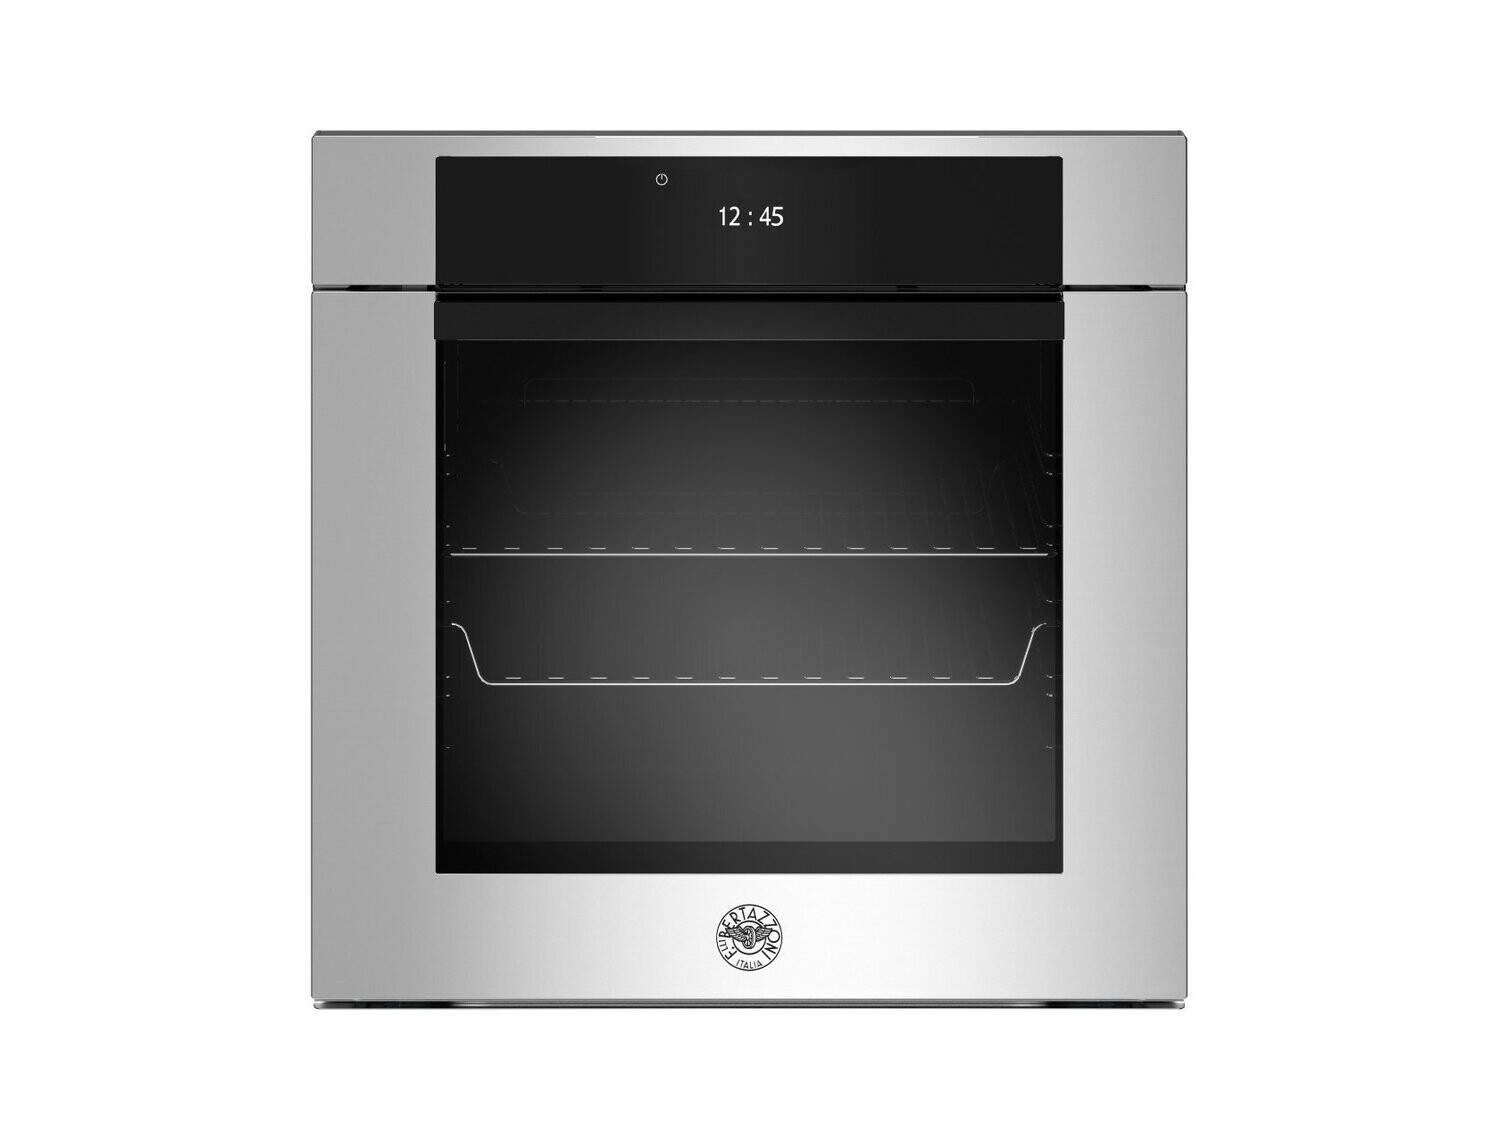 Bertazzoni 60cm Modern Series Built In Electric Pyro with TFT Display Oven, Colours: Stainless Steel